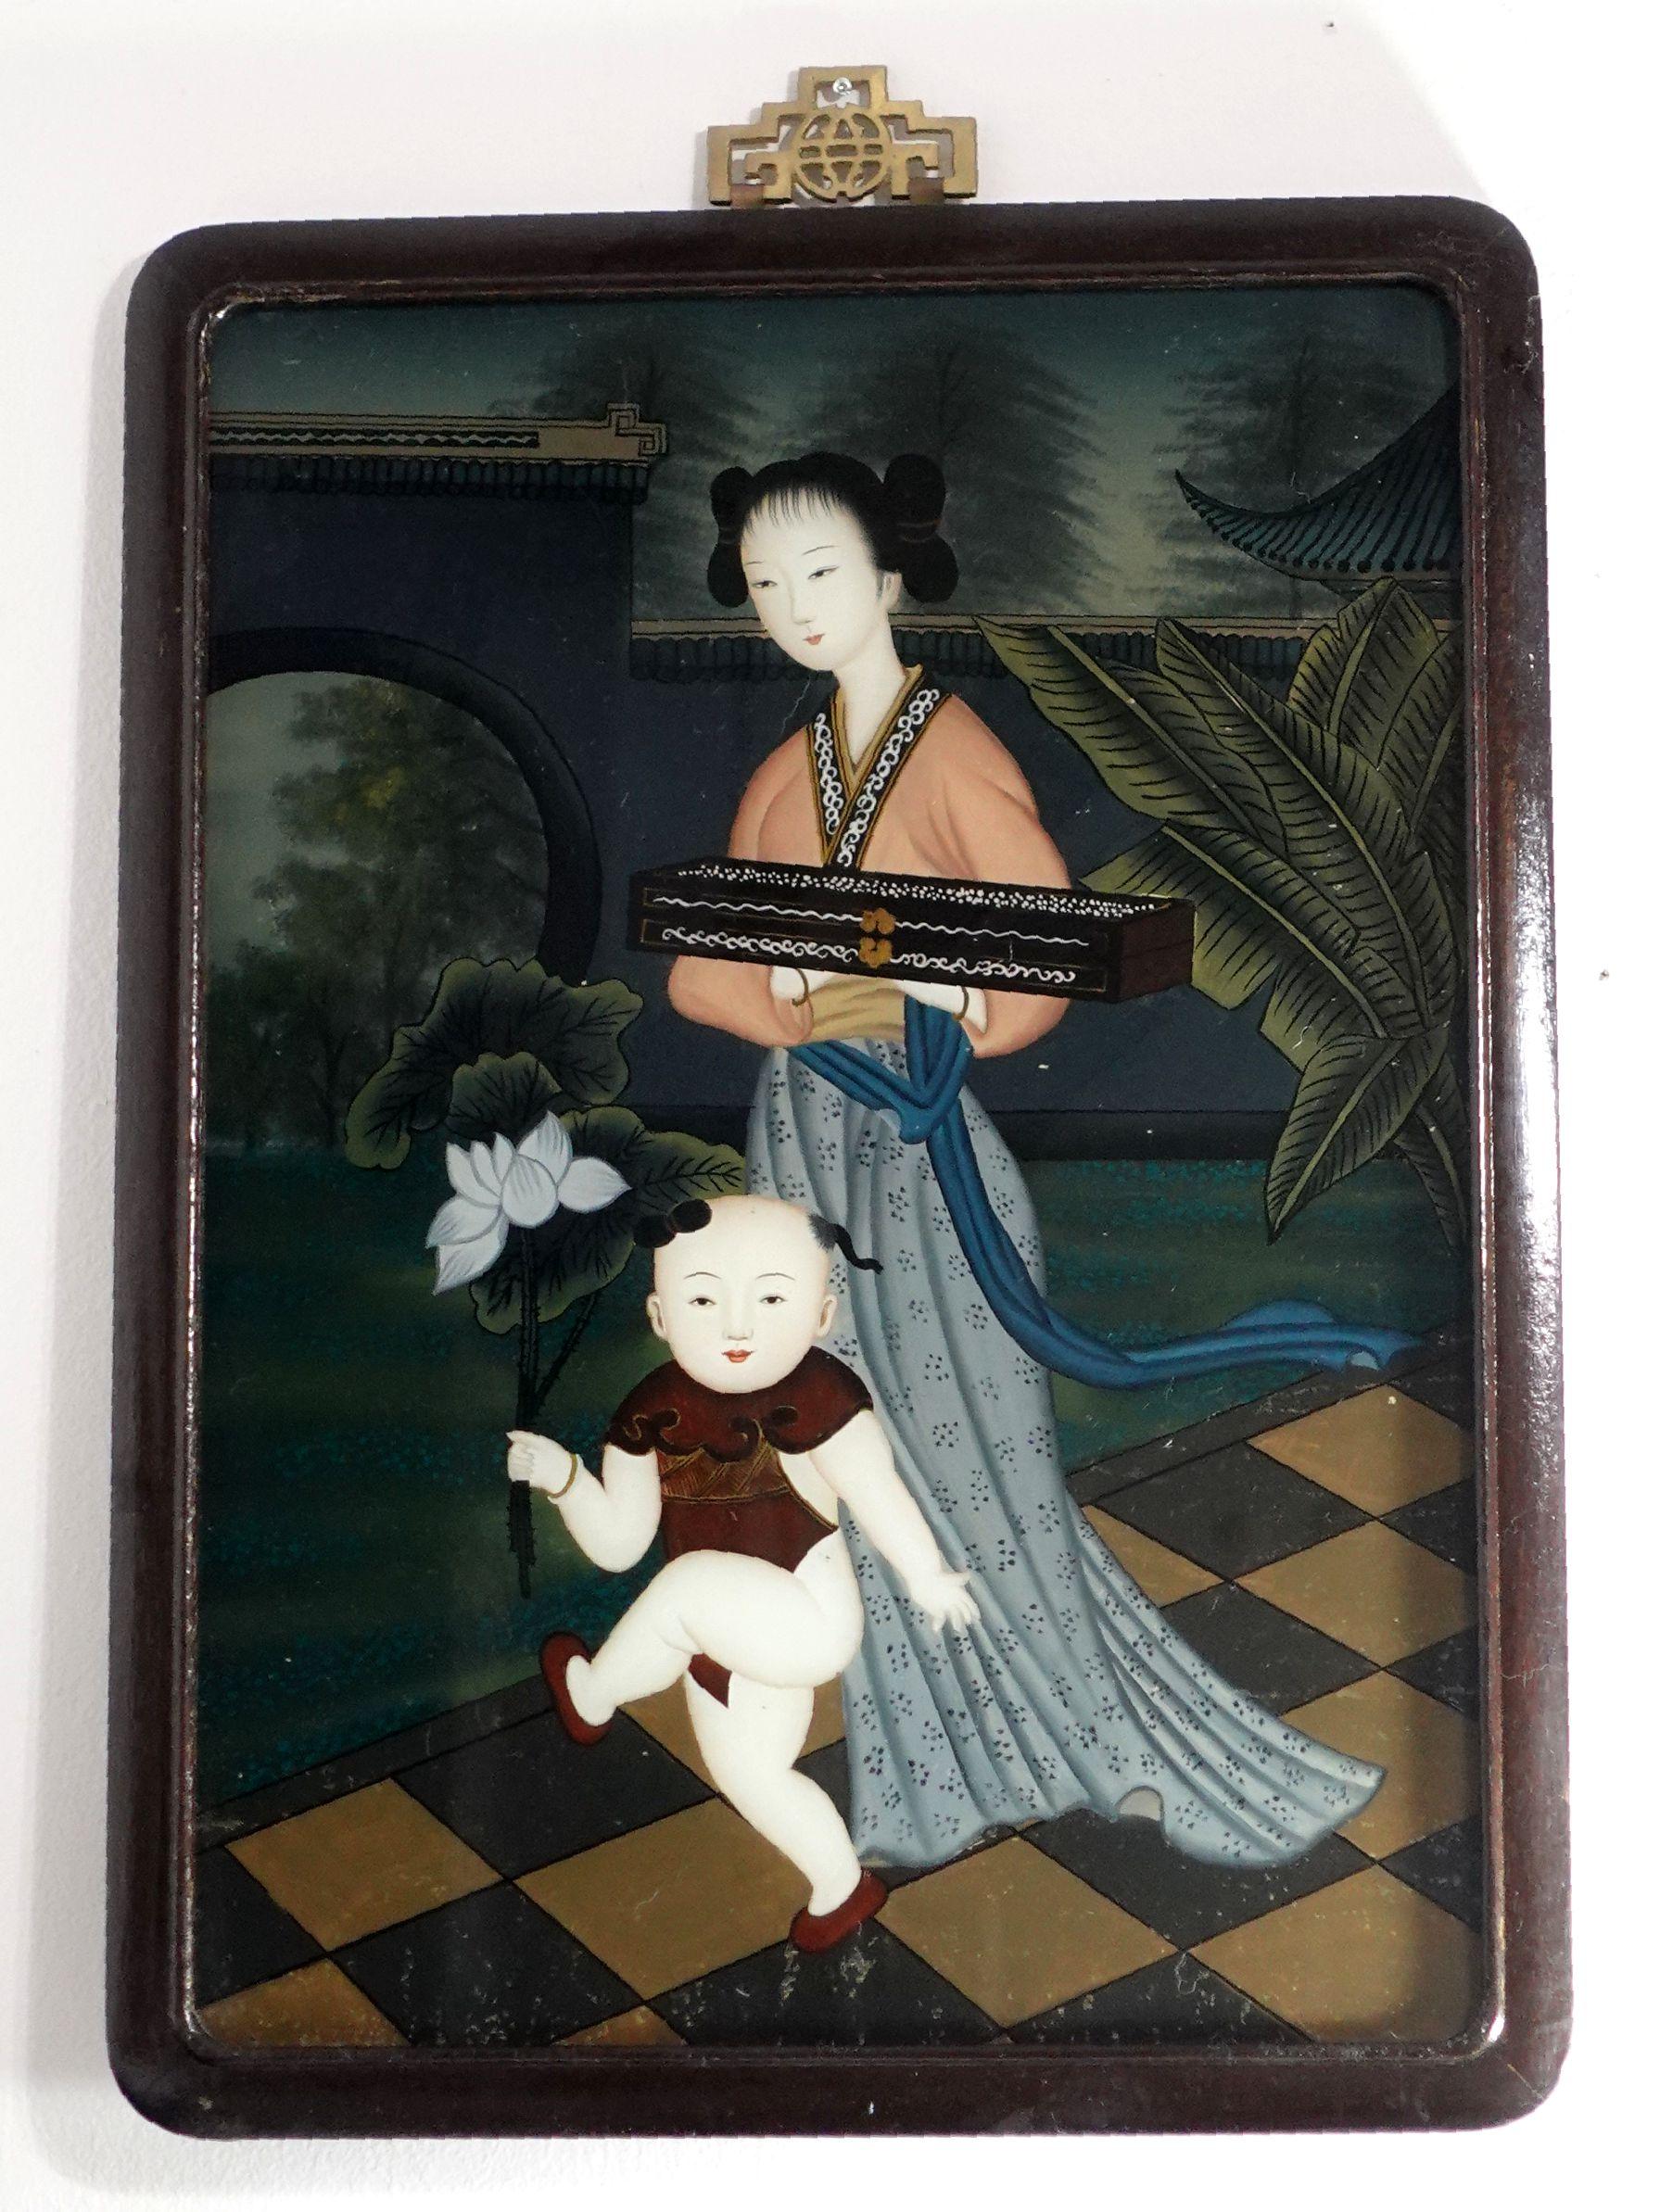 A charming late 19th-century to early 20th-century, Chinese export reverse glass painting, depicting a noblewoman within a courtyard setting with a kid who is holding a lotus, walking in the courtyard before a dividing wall and an opening with a